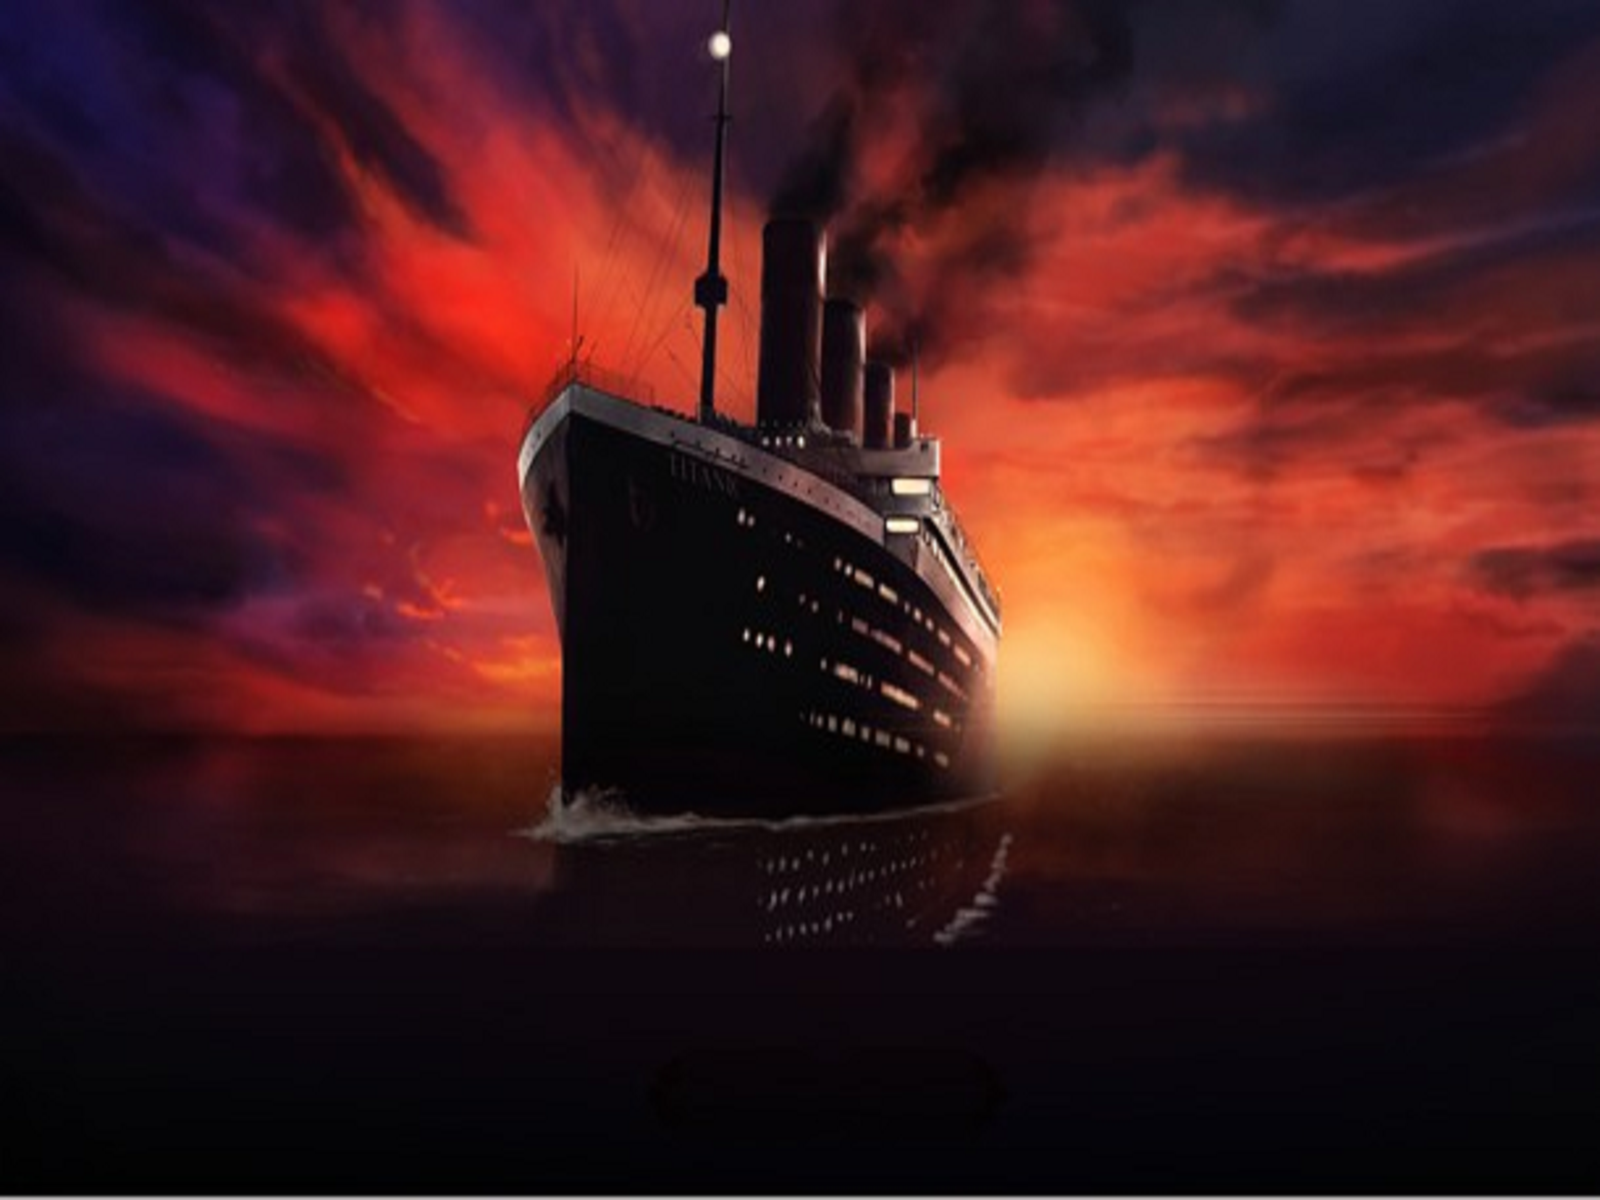 Rms Titanic Wallpapers - Wallpaper Cave